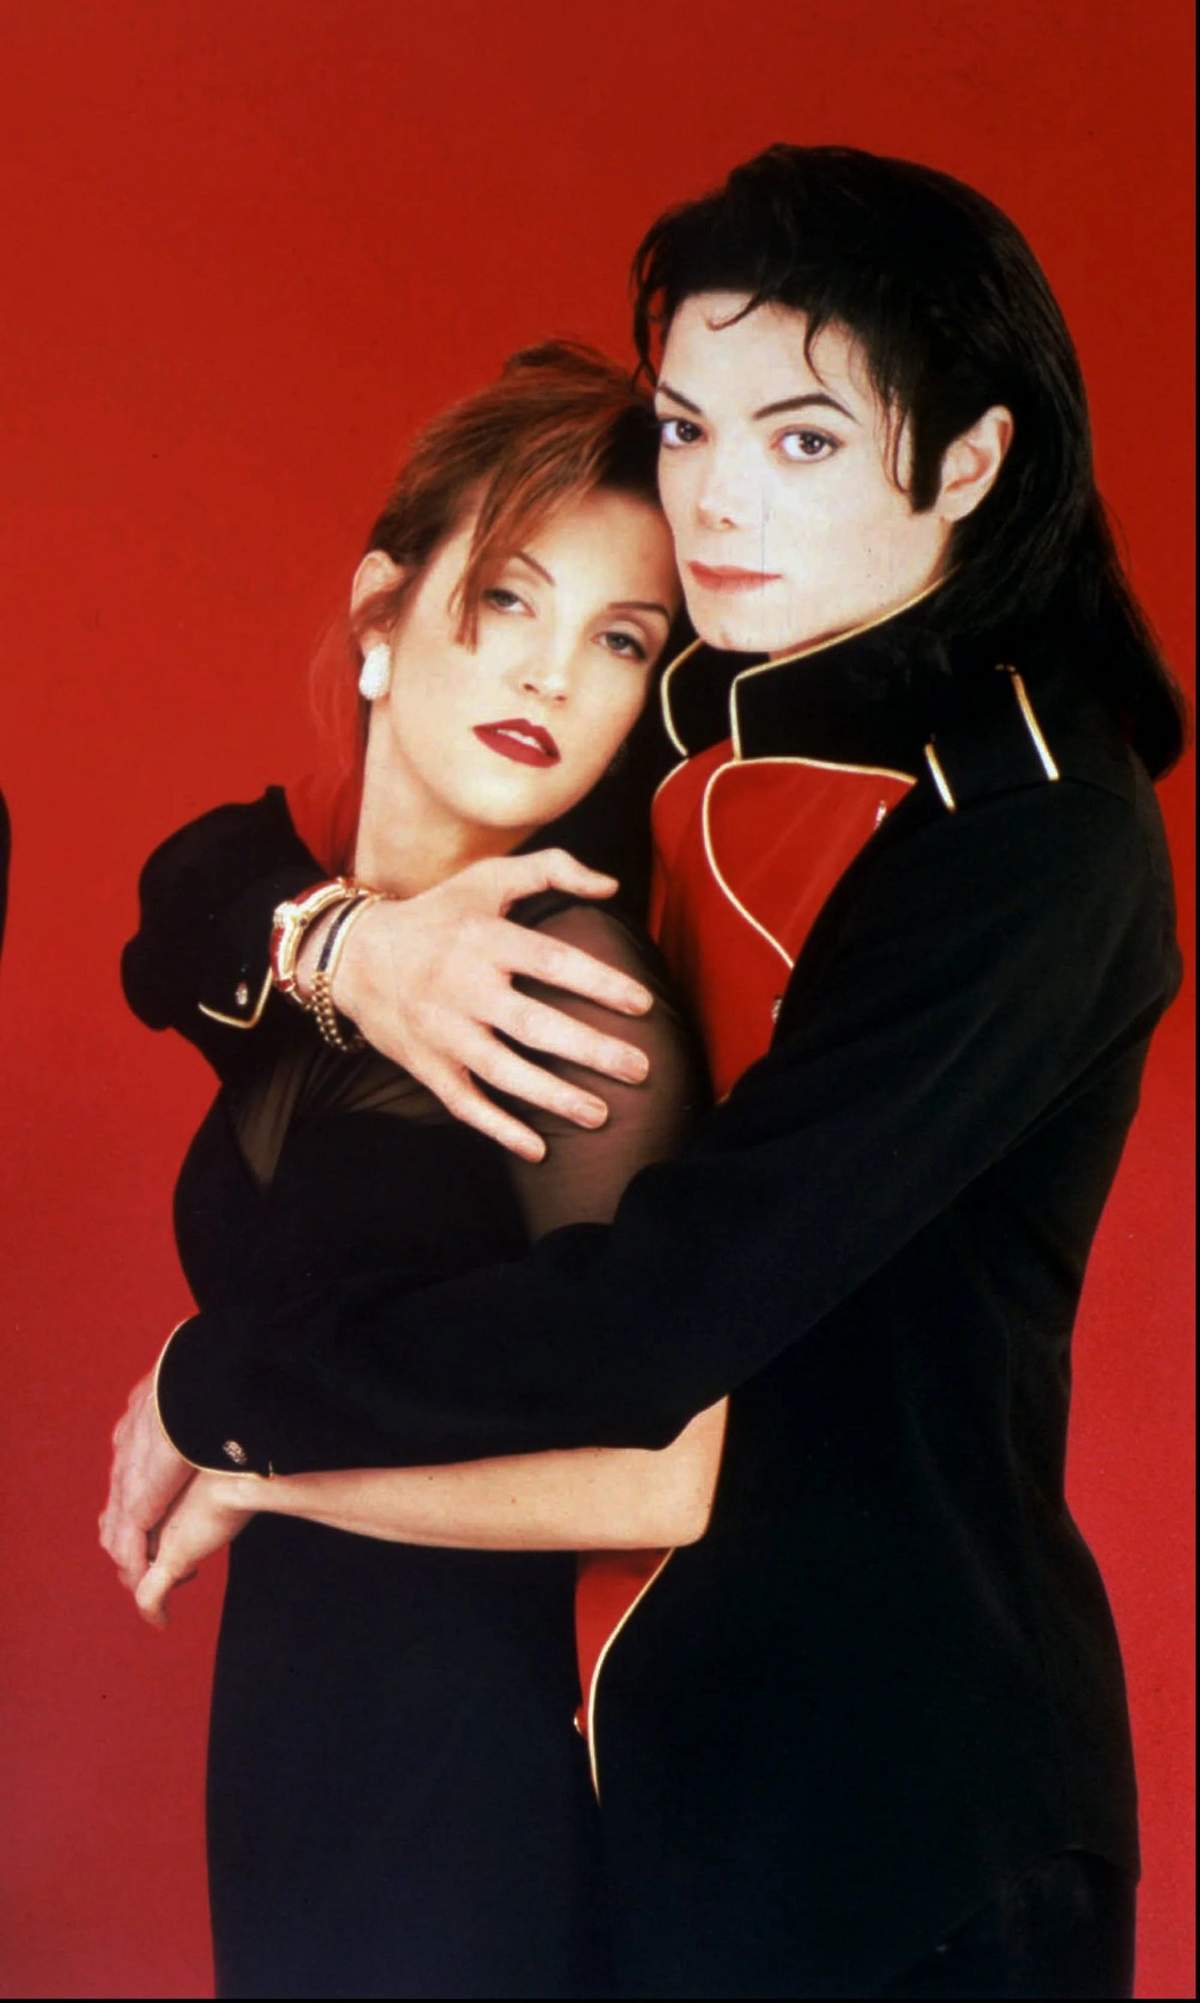 It's just unbelievable how Lisa Marie Presley lost all the Elvis